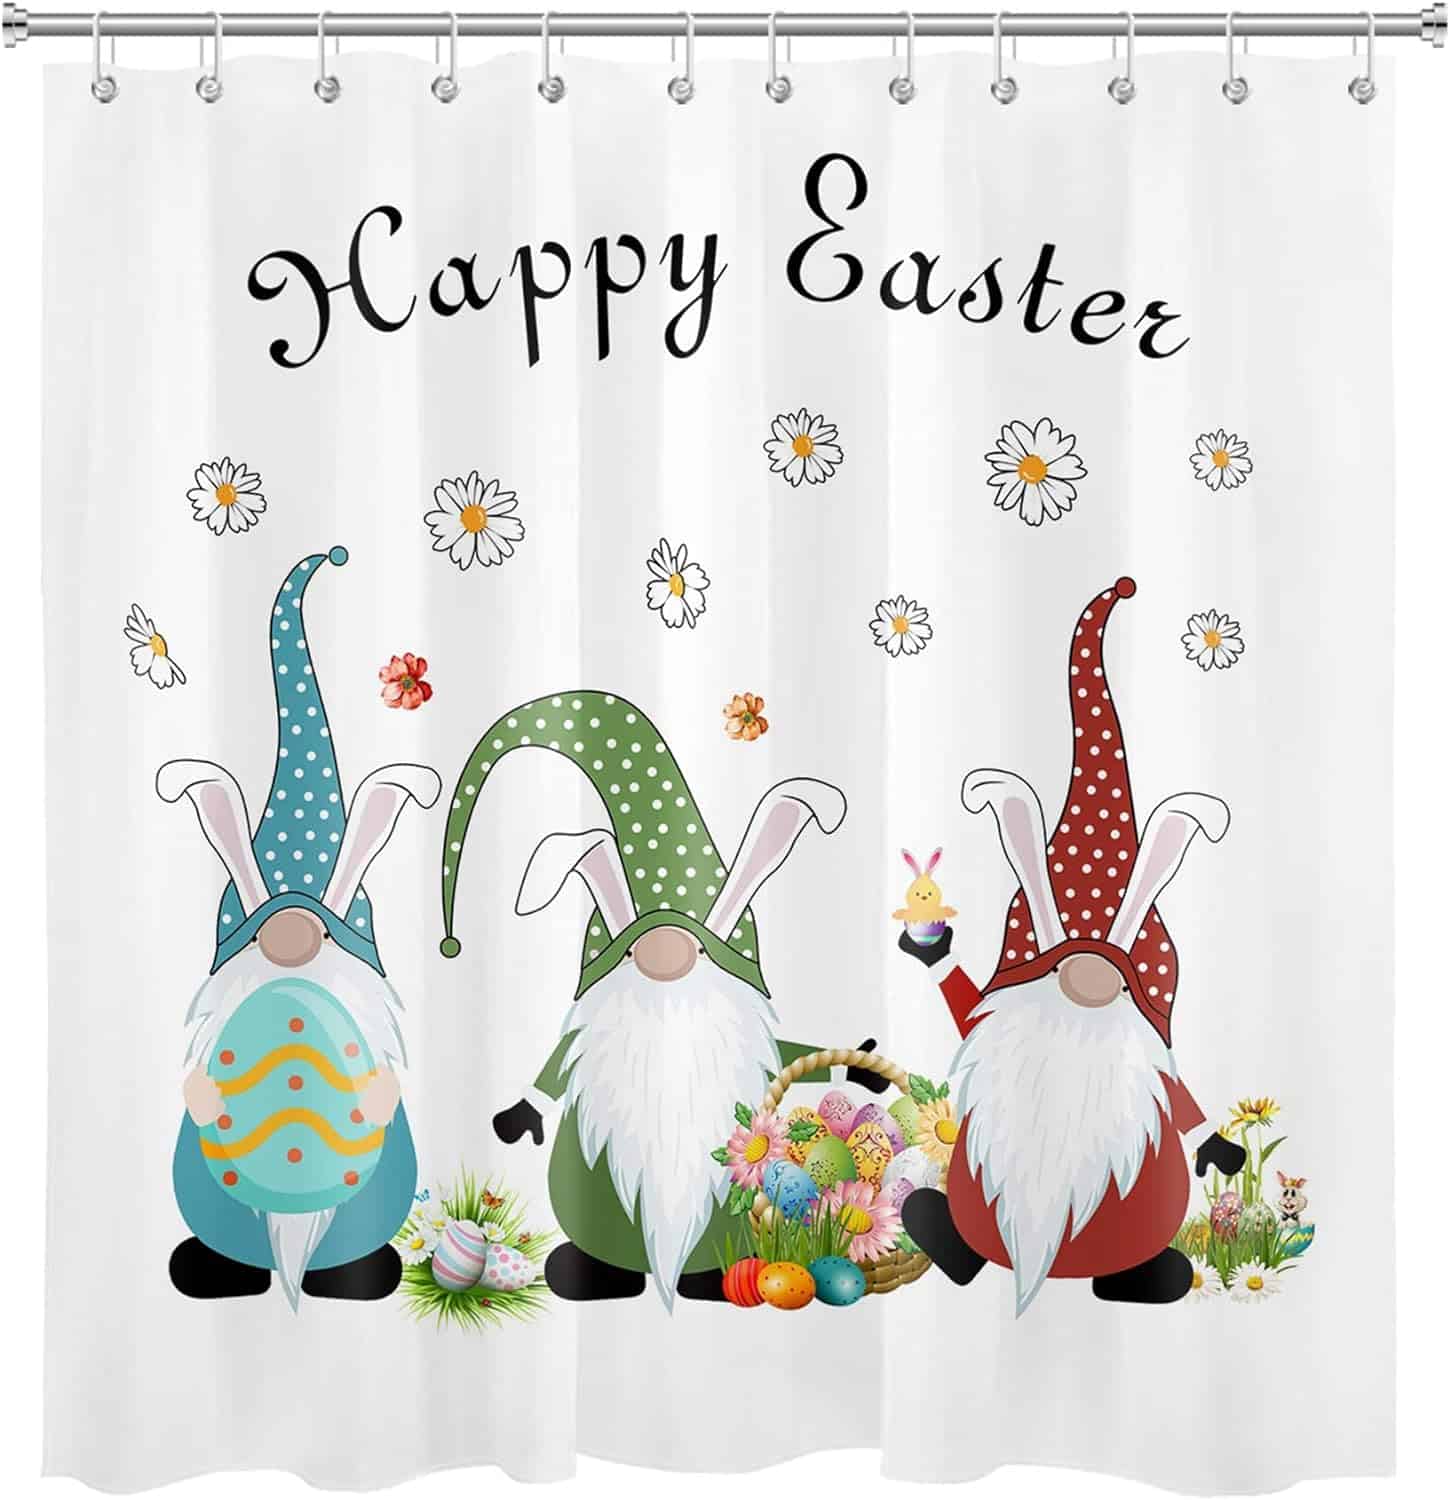 LB Spring Easter Shower Curtain: A Delightful Addition to Your Bathroom